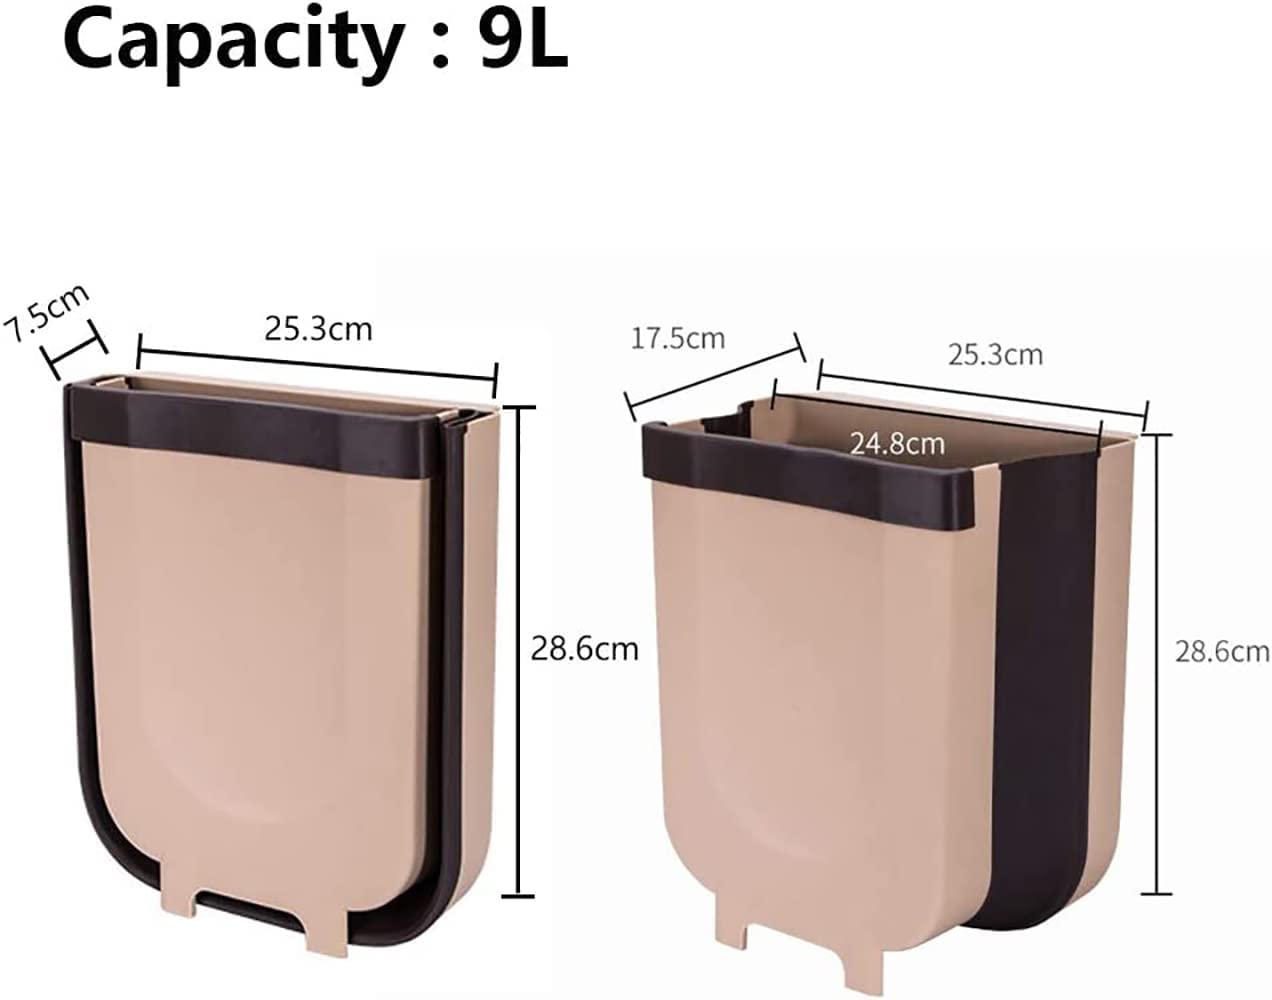 100pcs Hanging Trash Bin Compact Collapsible Garbage Pail for Kitchen or Bathroom Drawers, Cupboards and Door - Brown